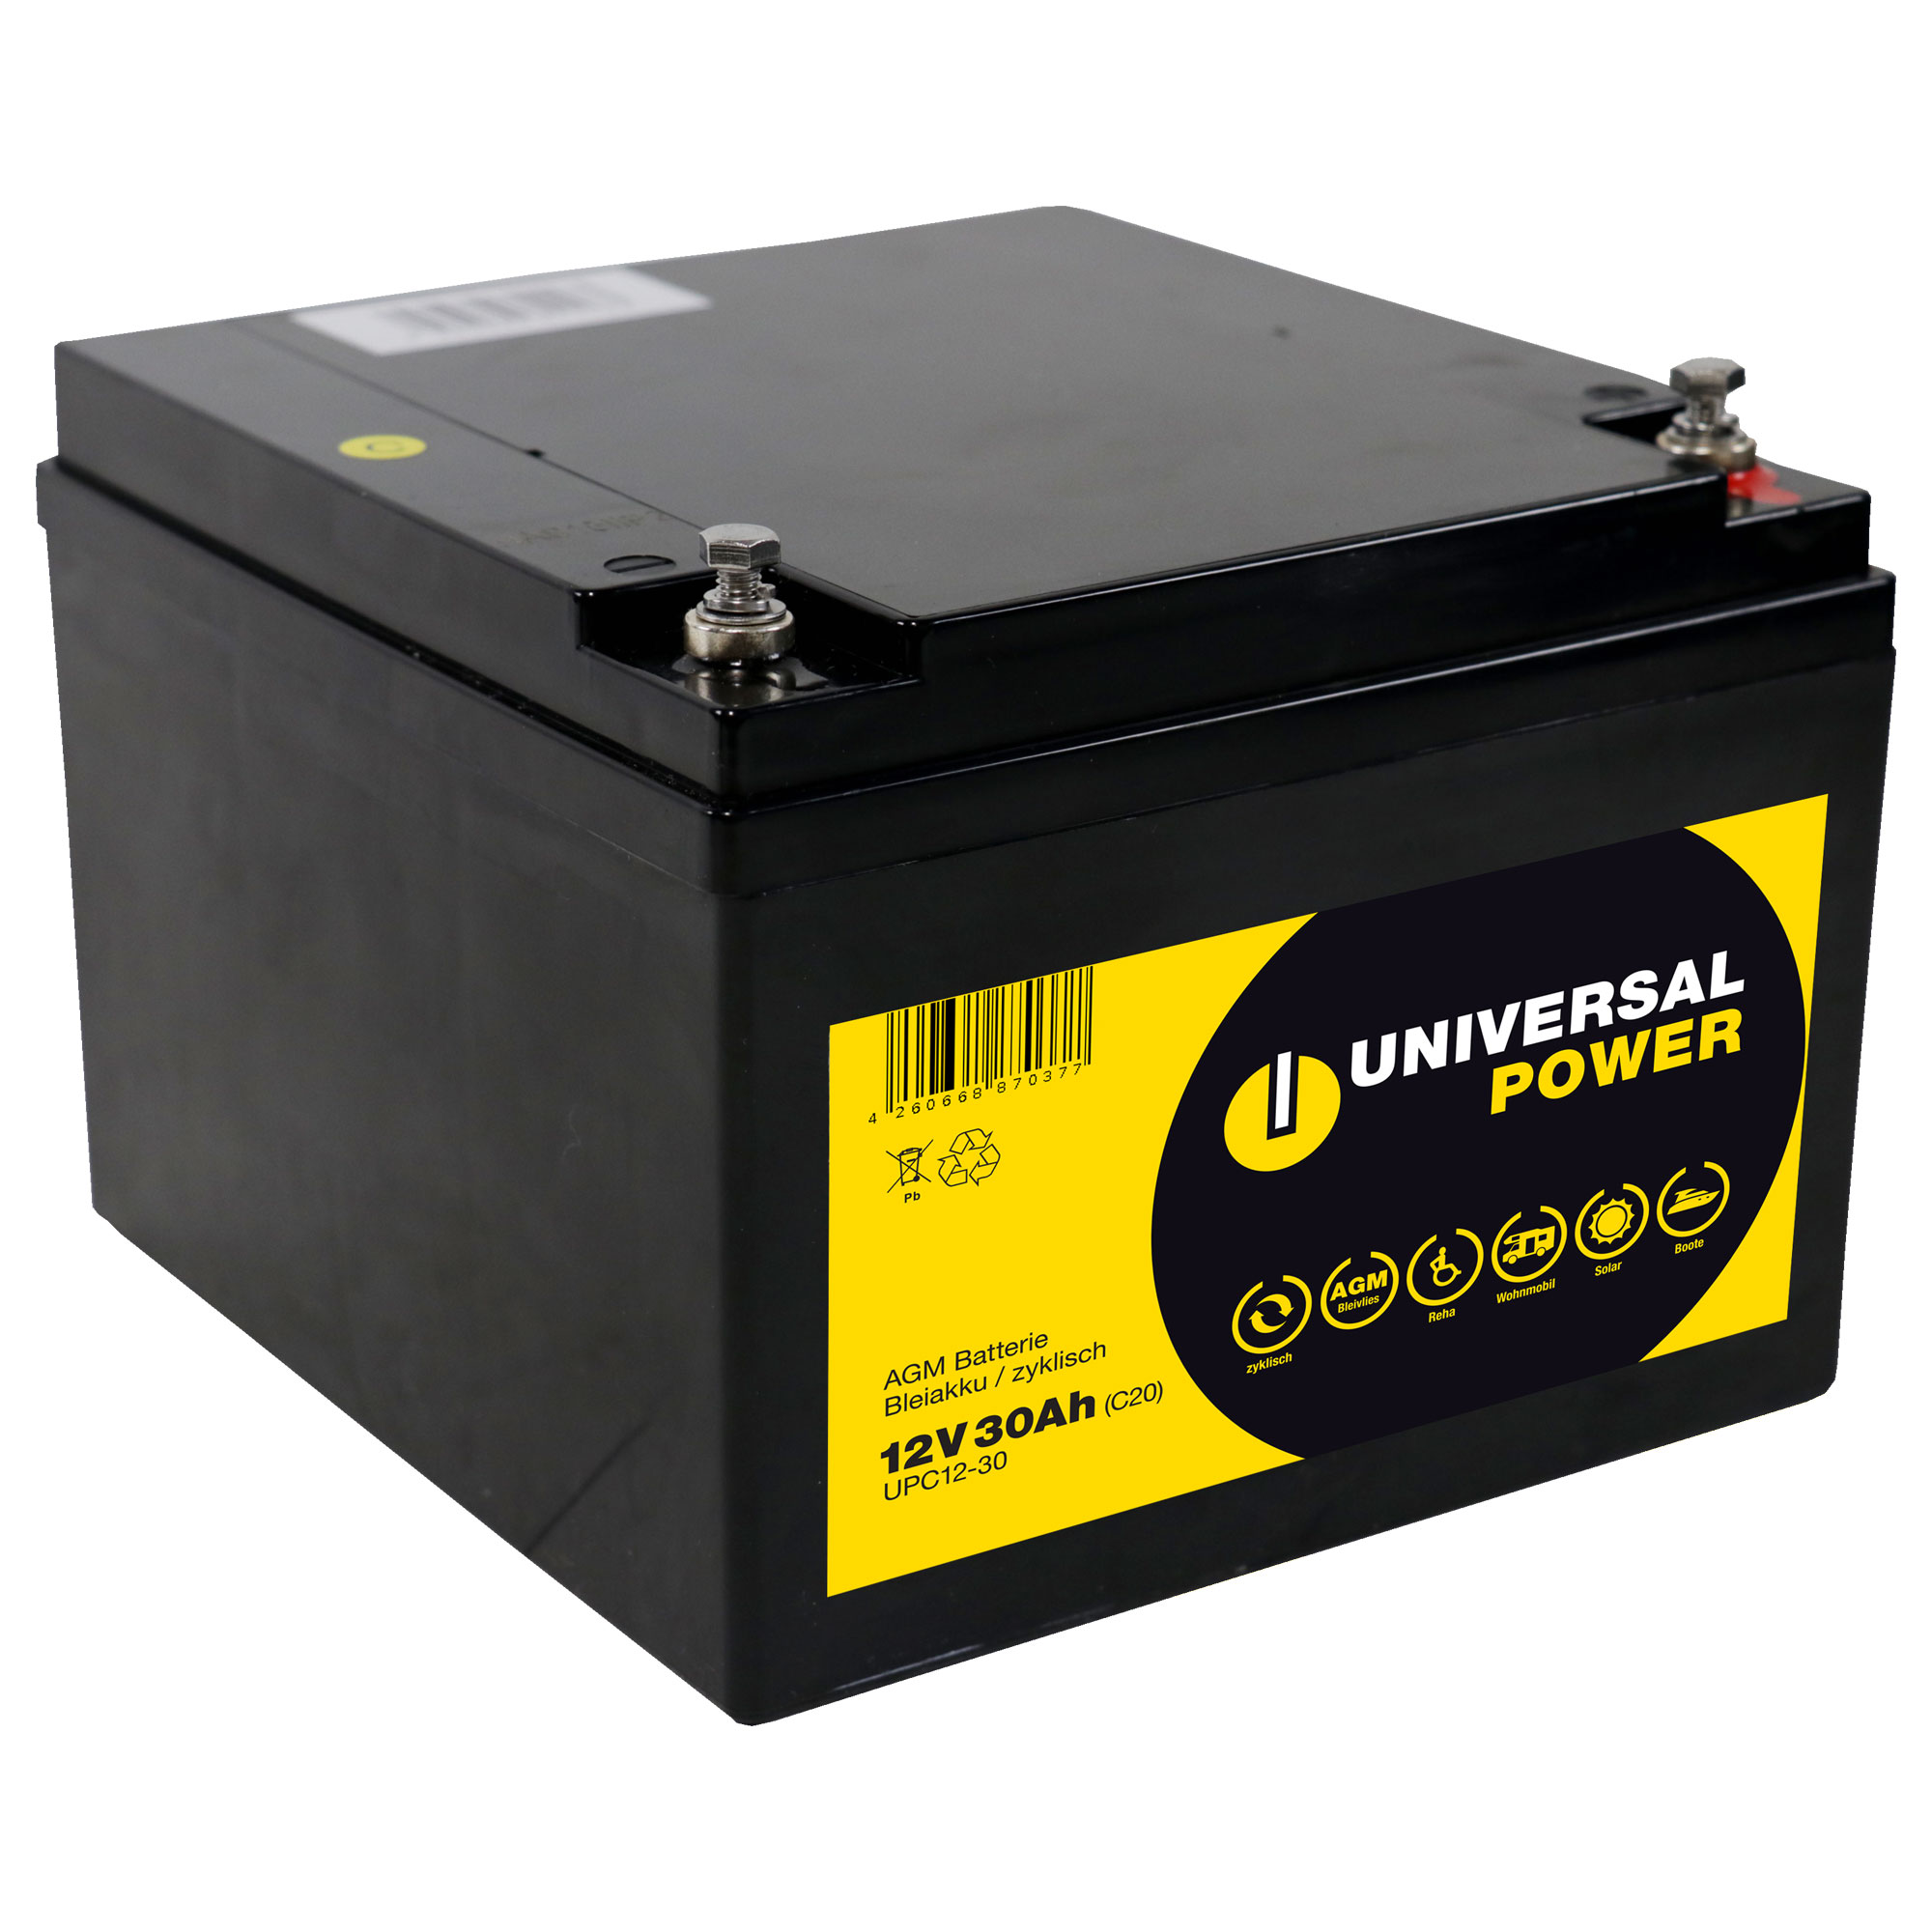 Universal Power AGM UPC12-30 12V 30Ah AGM Batterie zyklenfest wartungsfrei